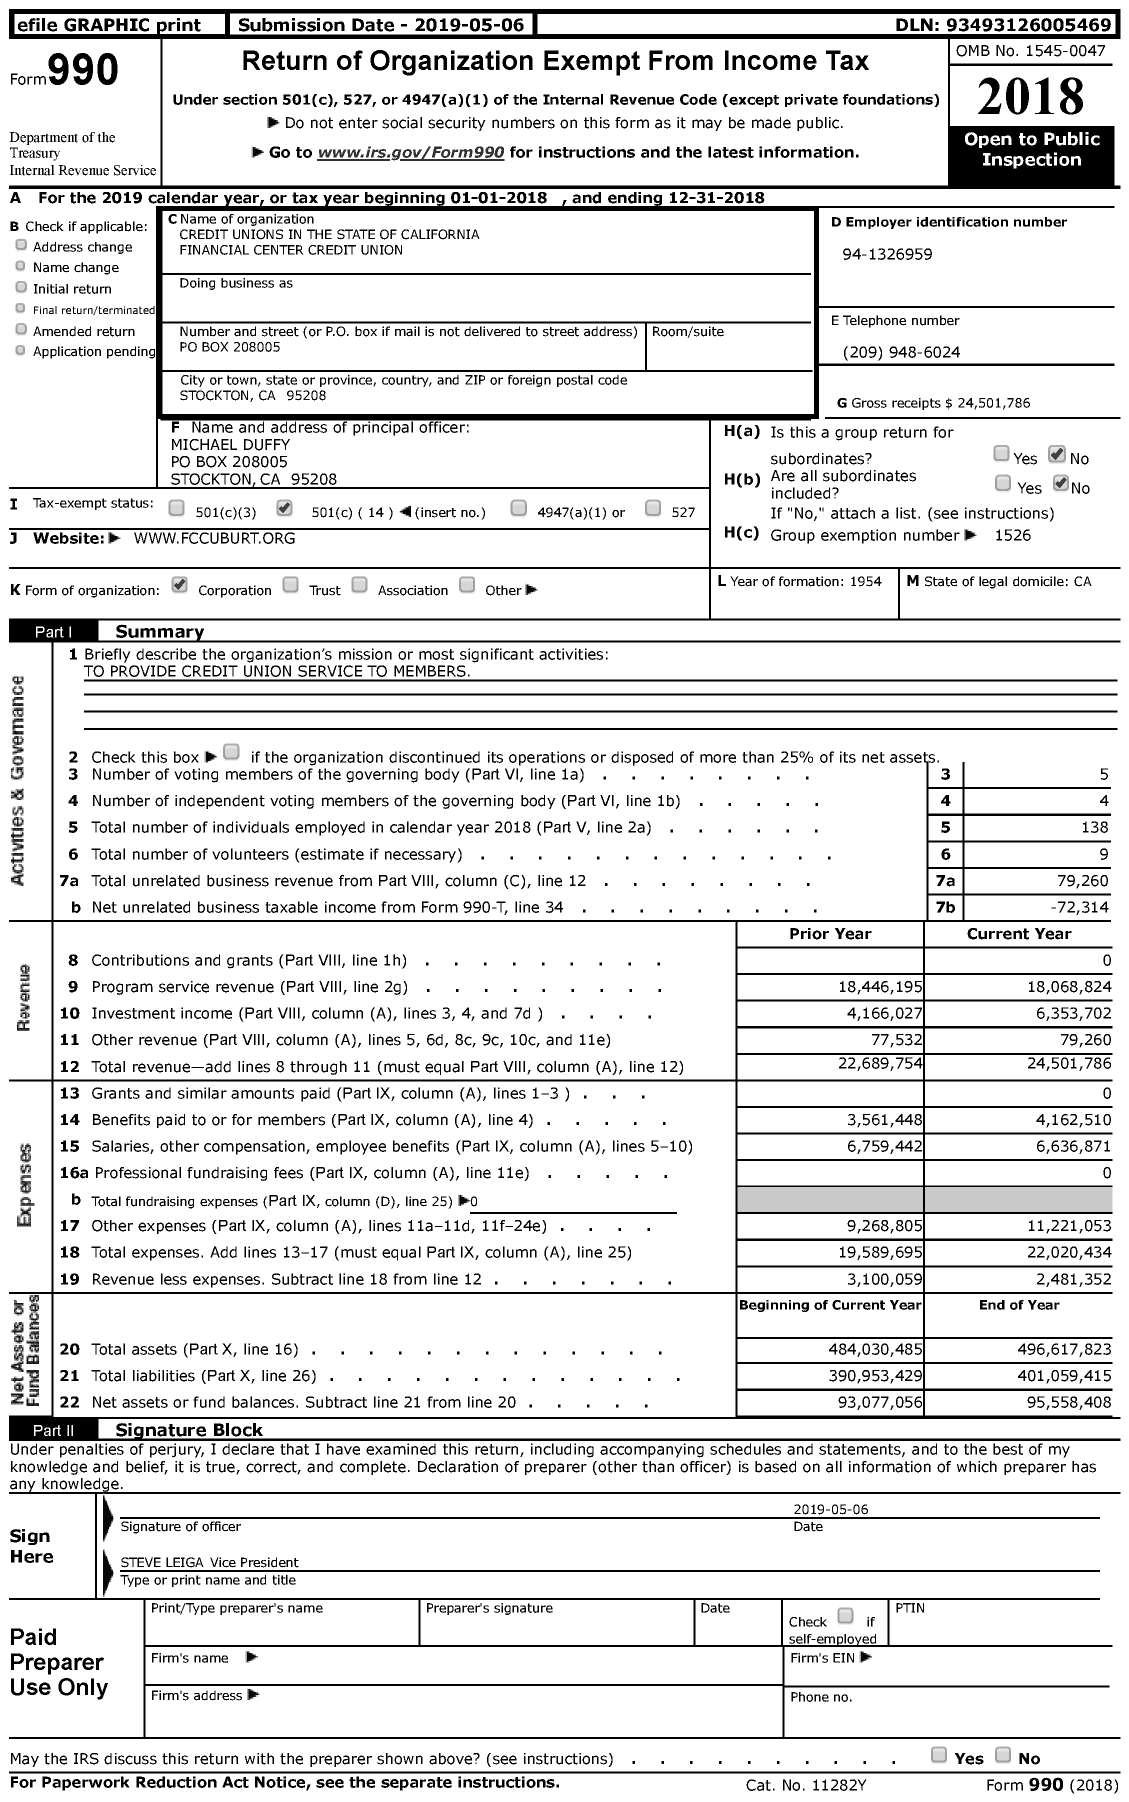 Image of first page of 2018 Form 990 for Credit Unions in the State of California Financial Center Credit Union